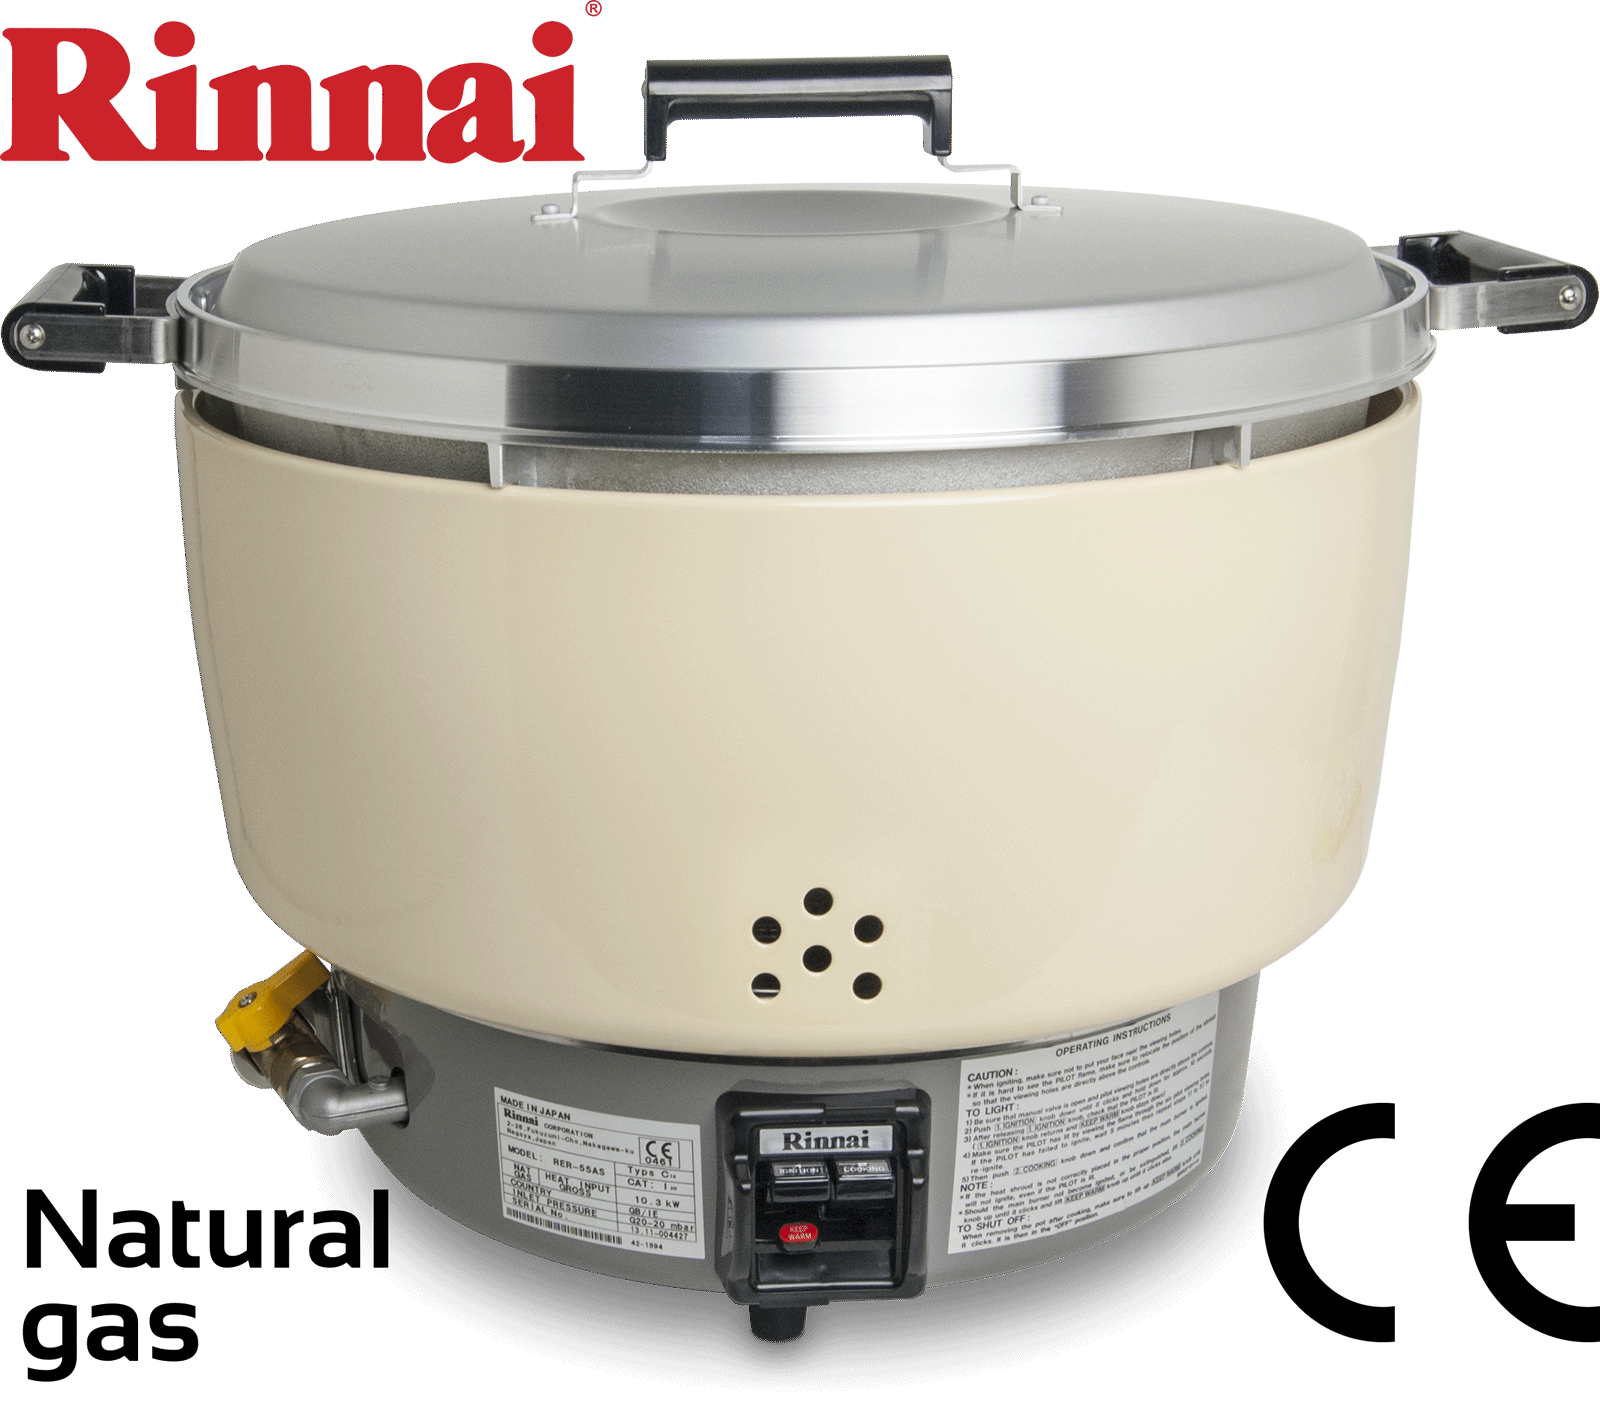 Gas rice cooker Rinnai, Japanese, natural gas, with CE validation 0